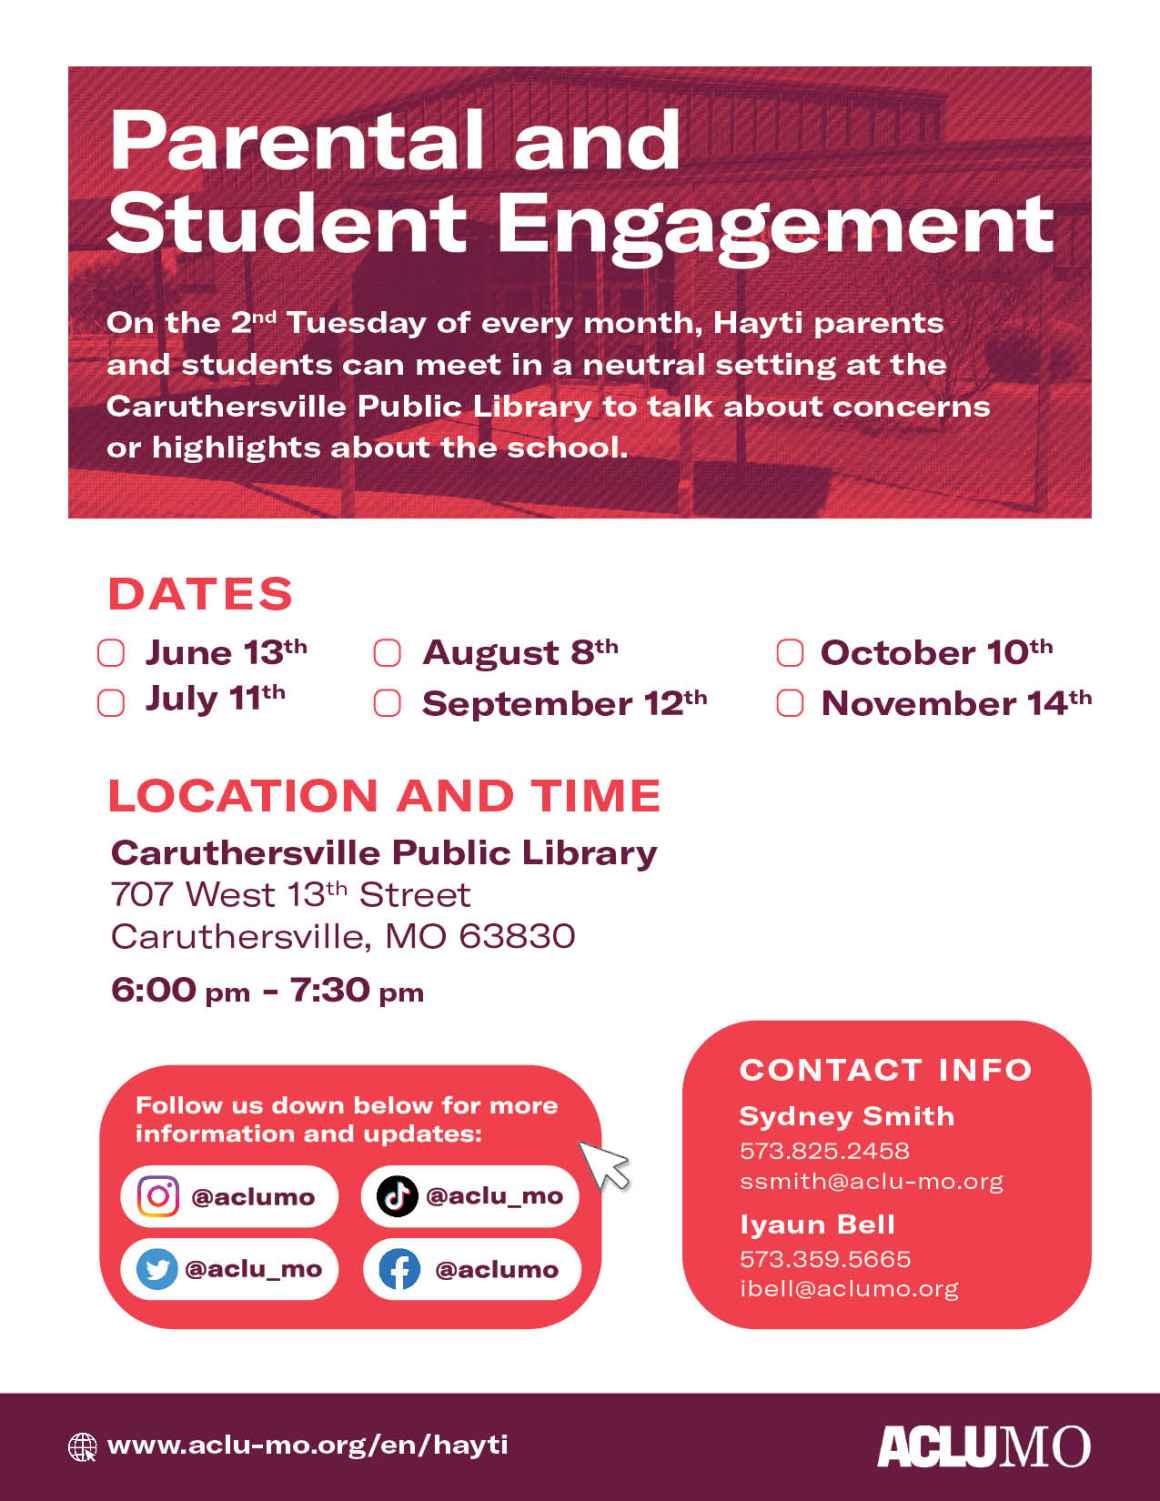 a flyer advertising for a parental and student engagement session with the ACLU of Missouri that will be held on the second Tuesday of every month, 6 p.m. at the Caruthersville's Public Library. 